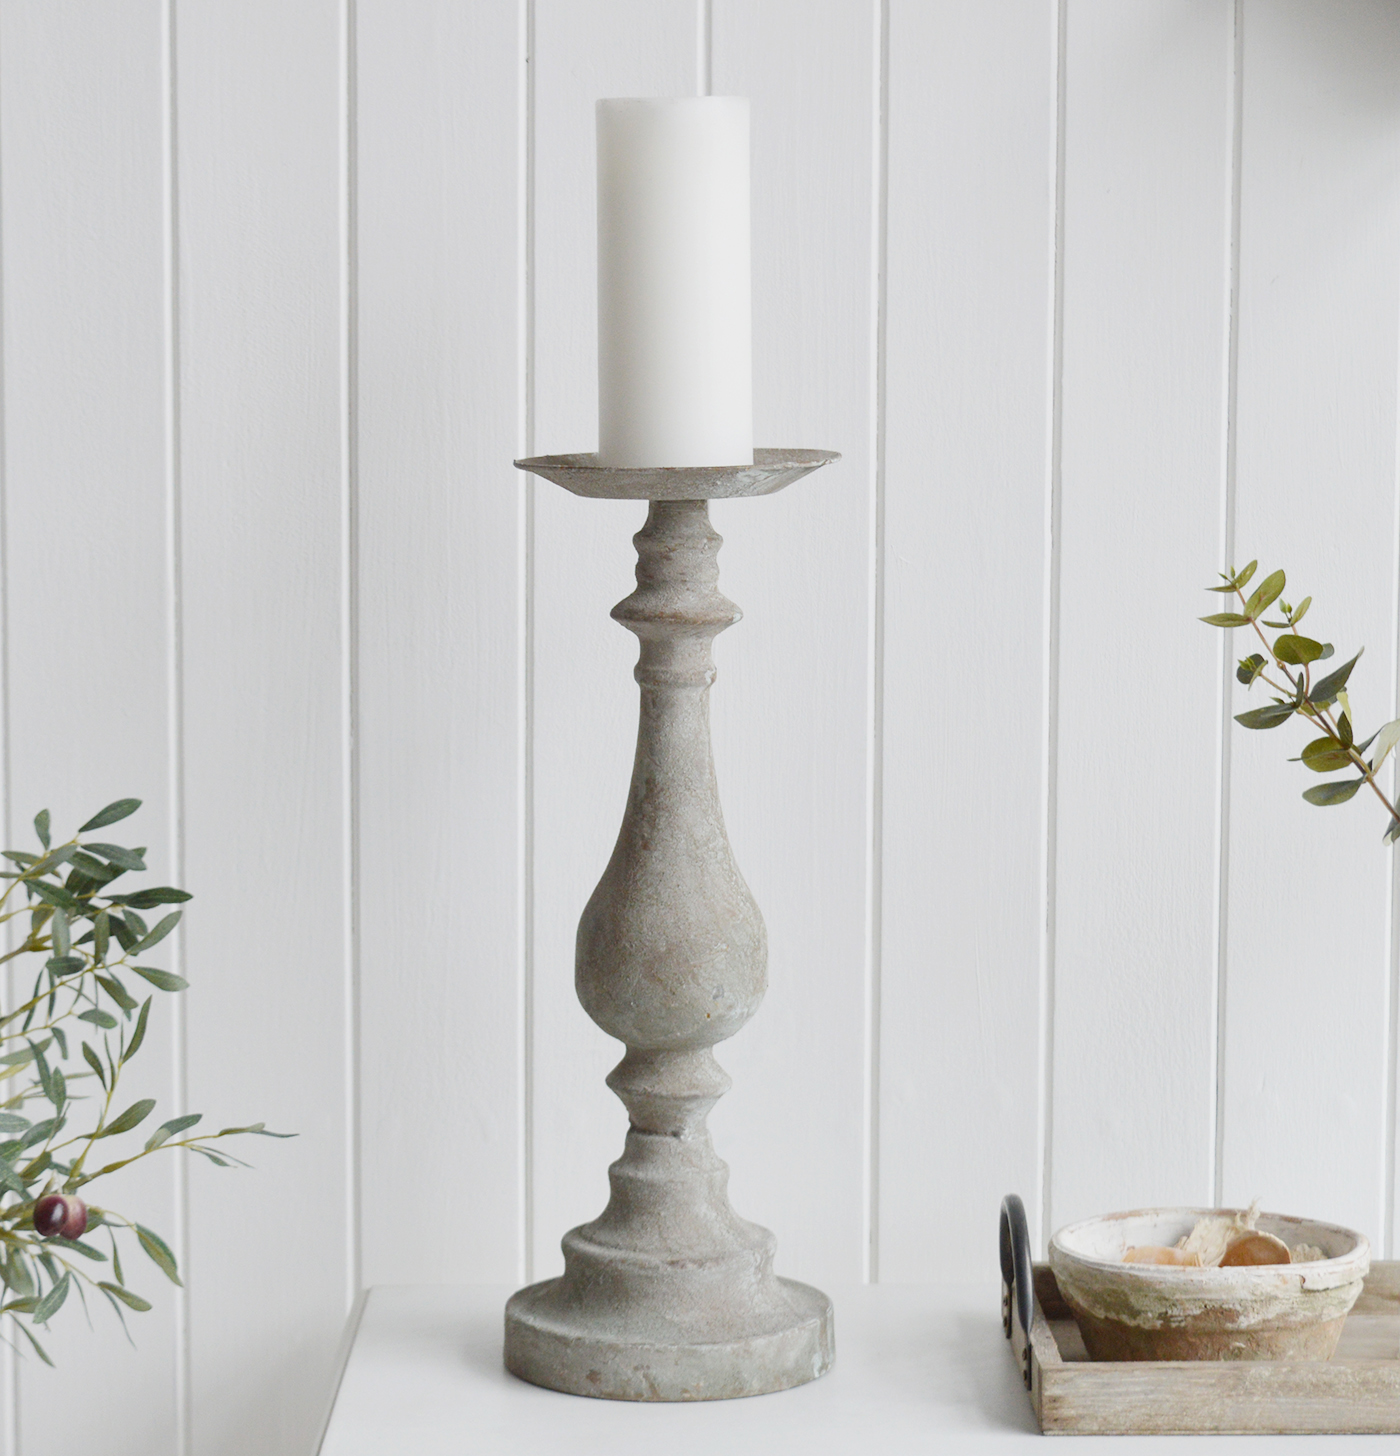 Rowley Rustic Candle Holders - The White Lighthouse New England Coastal Farmhouse and Country Home Furniture and Decor Accesories